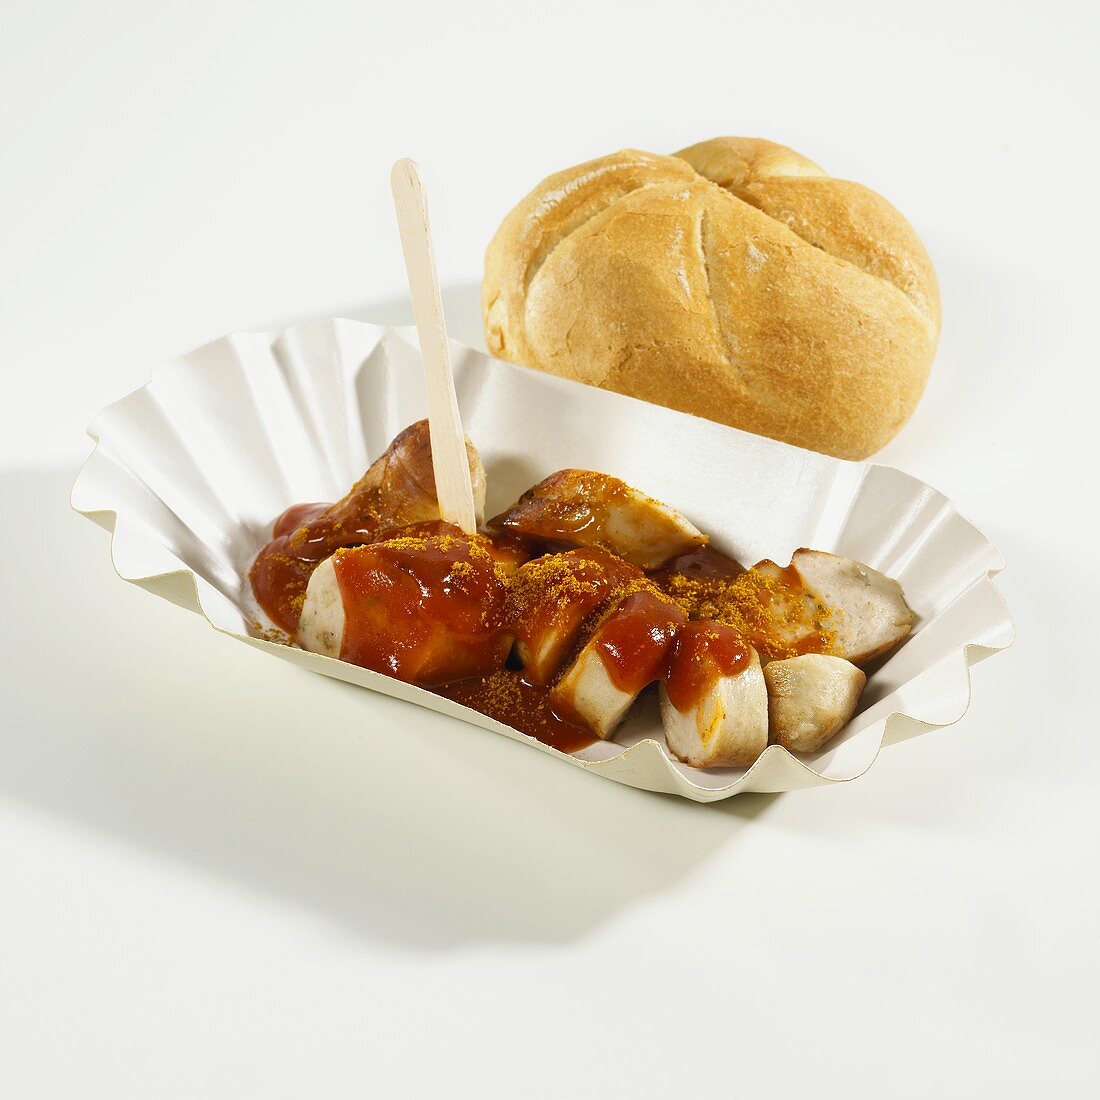 Currywurst (curry sausage) with bread roll